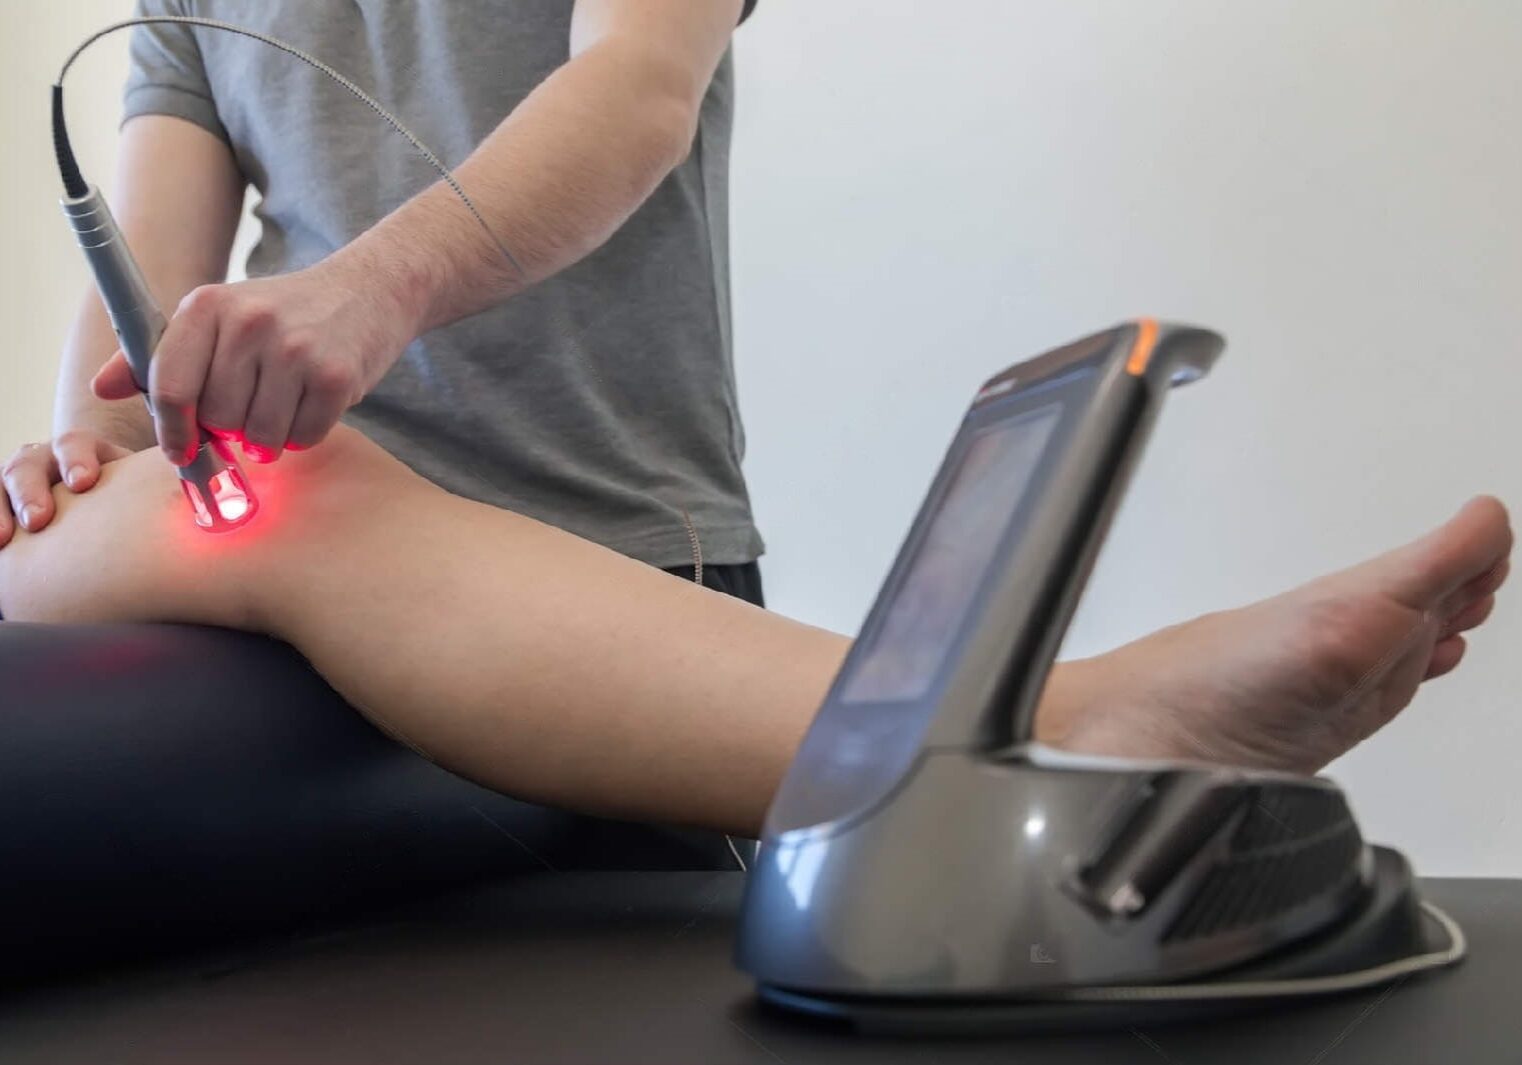 depositphotos_188918040-stock-photo-laser-therapy-on-a-knee-transformed